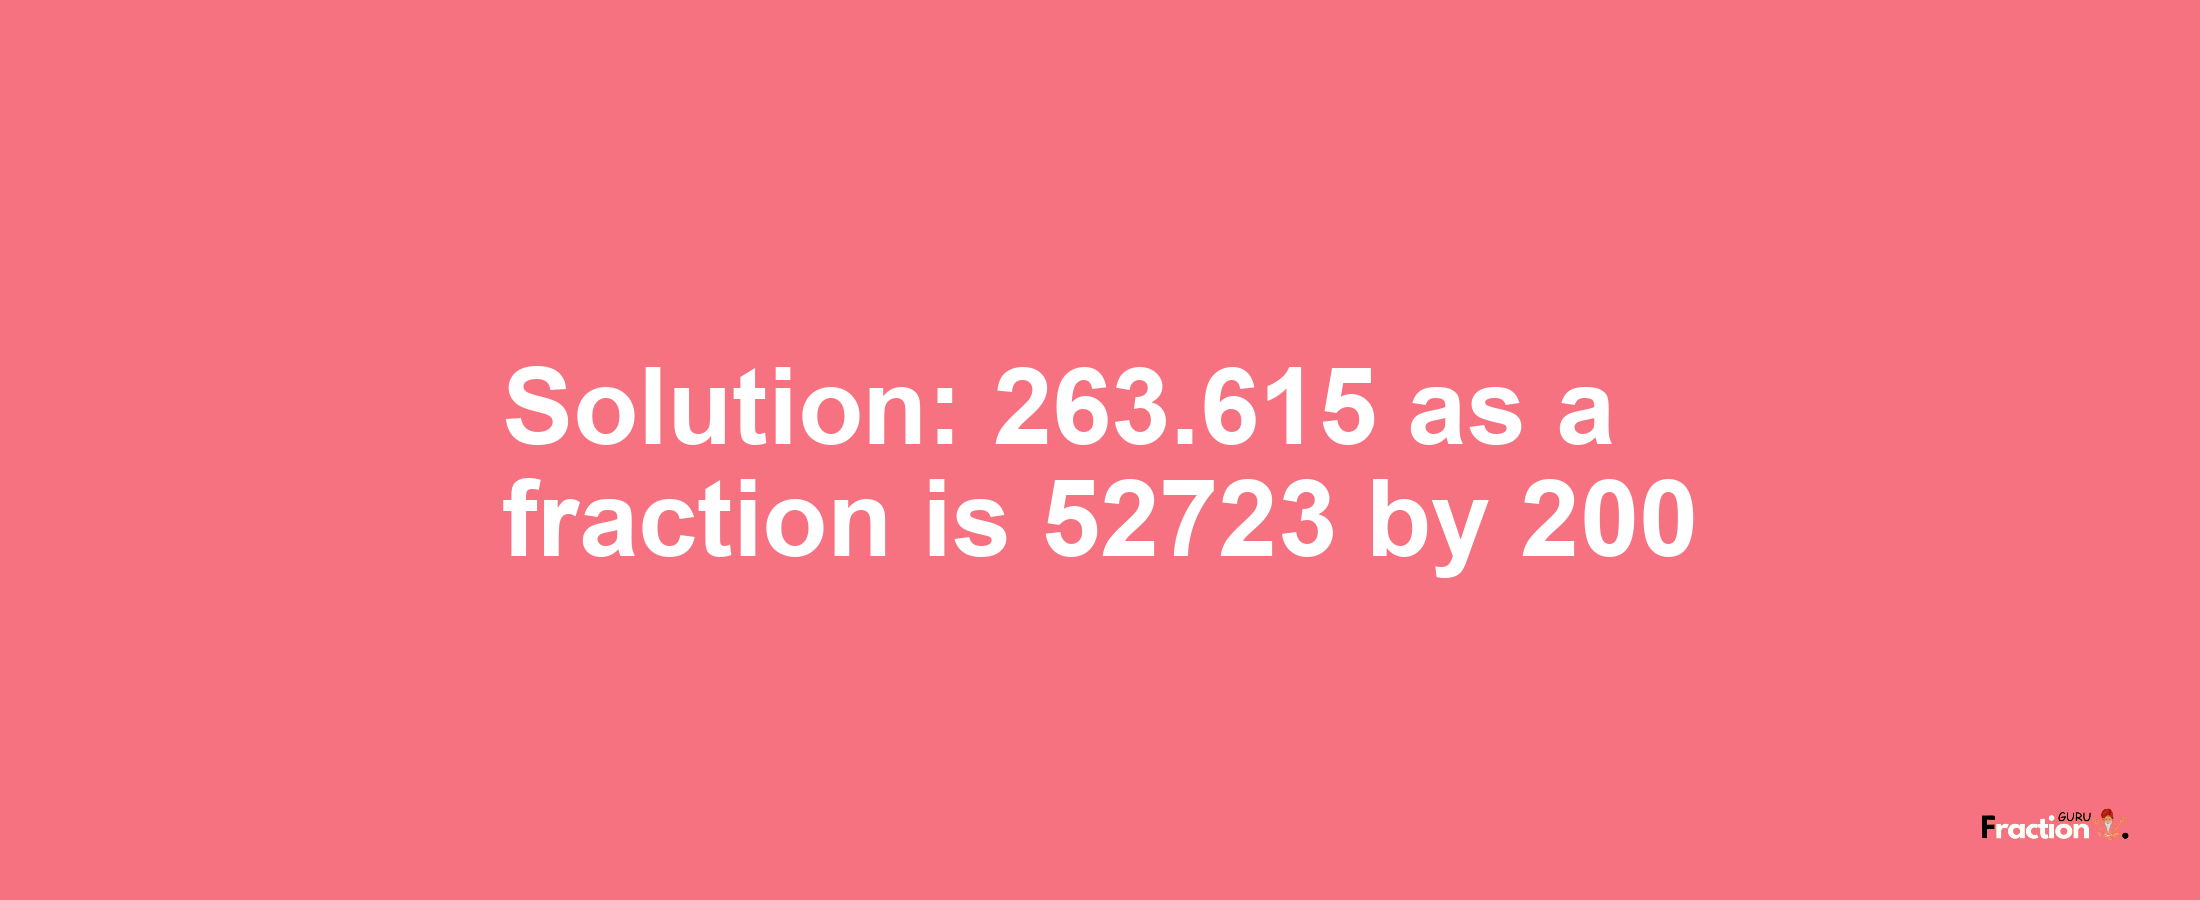 Solution:263.615 as a fraction is 52723/200